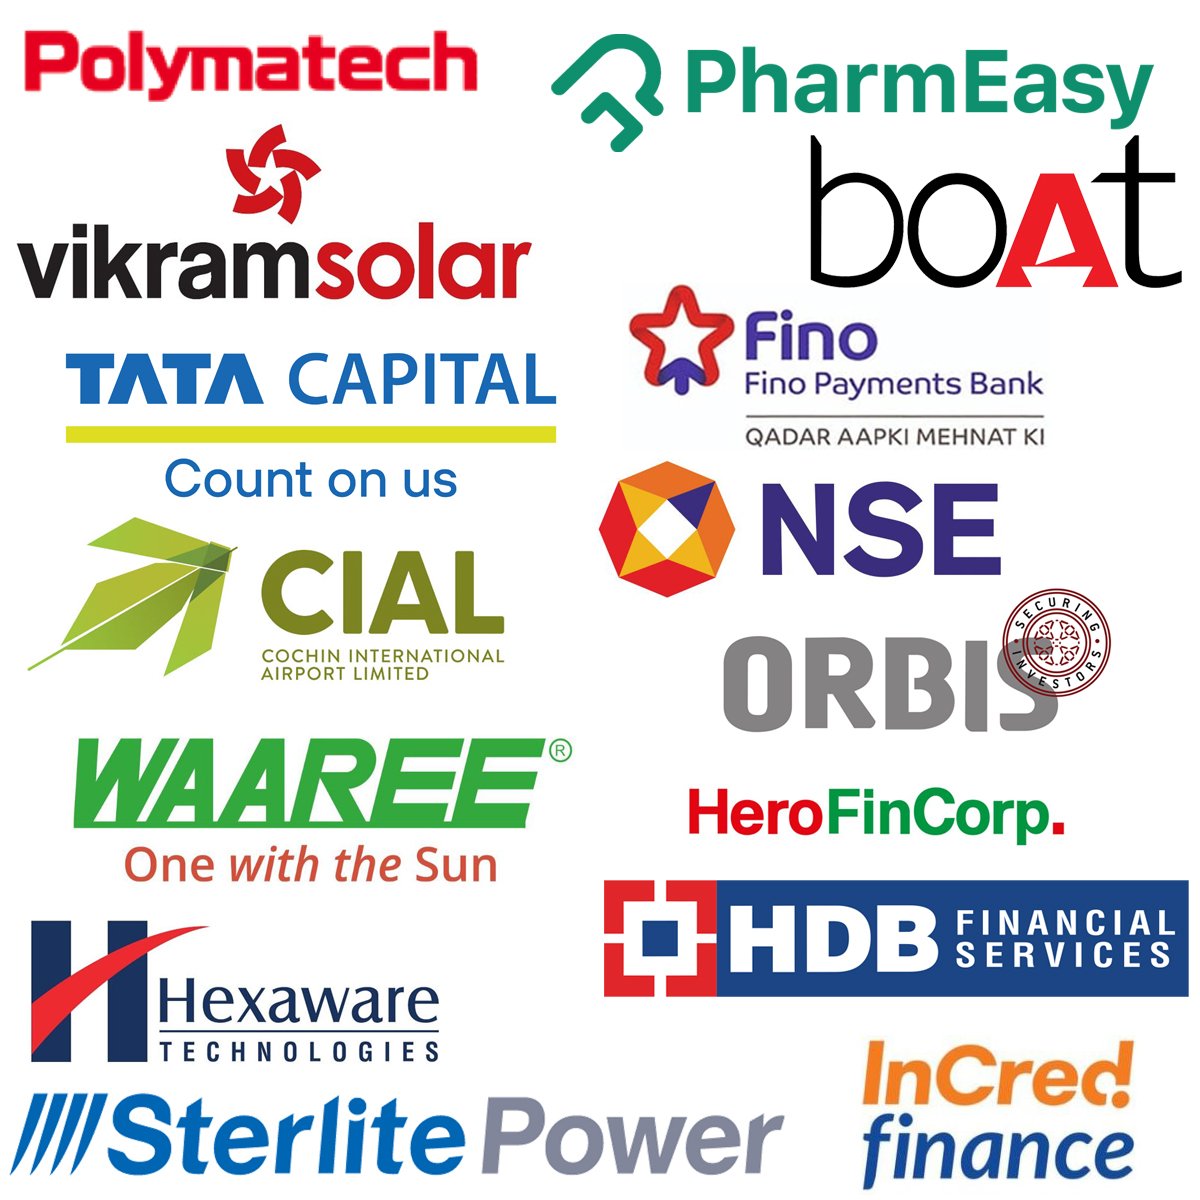 Pre ipo shares available 
More details 
6380604052
#Ntr
#rcb
#preipo
#polymTech
#vikramsolar
#nse
#tatacapital
#boat
#parmEasy
#fino